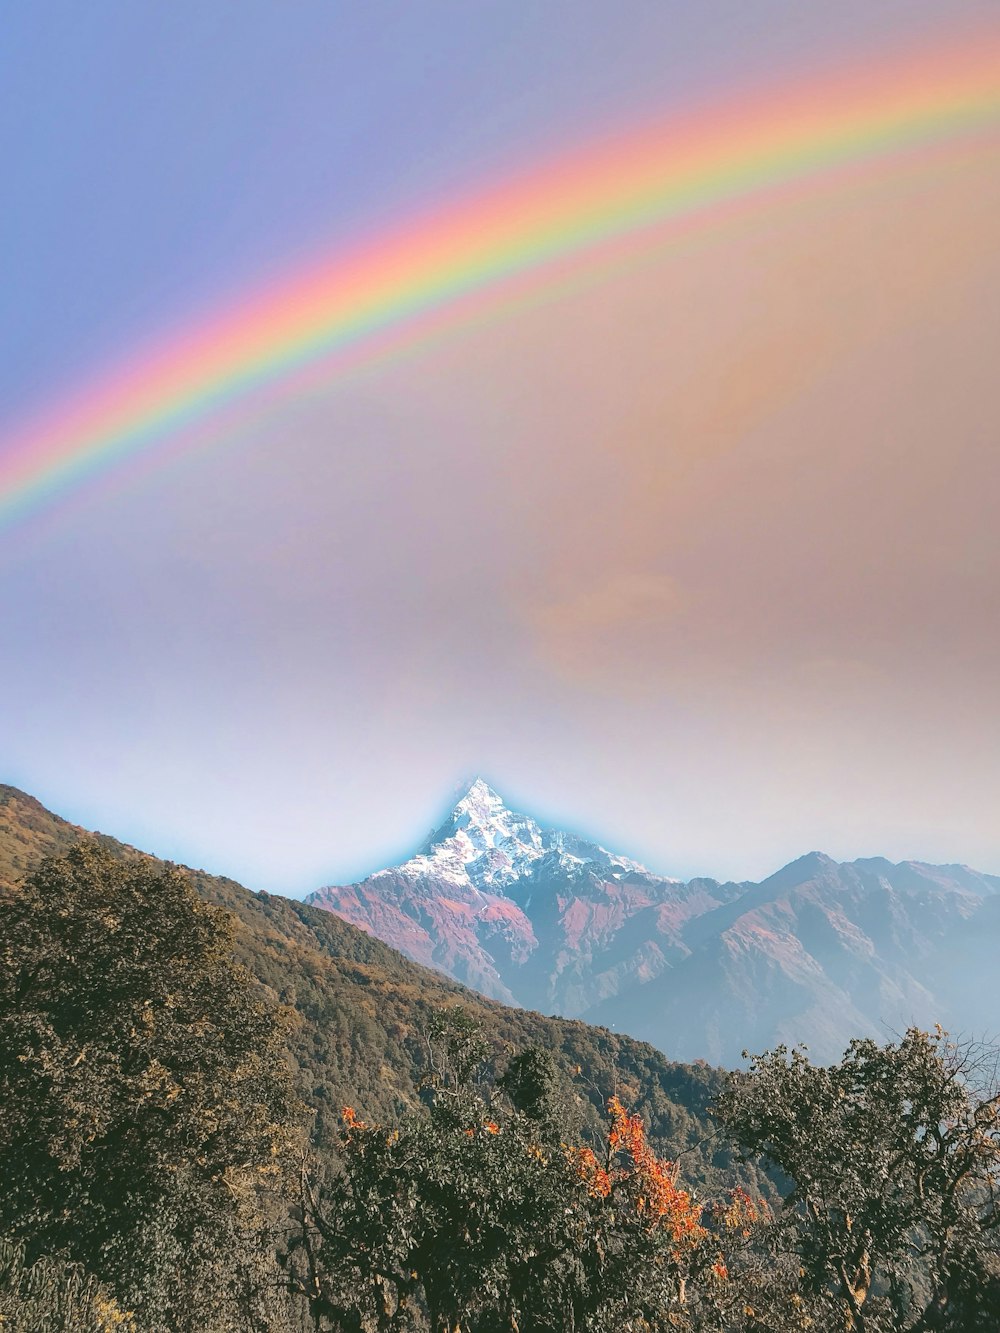 a rainbow appears over a mountain range in the distance